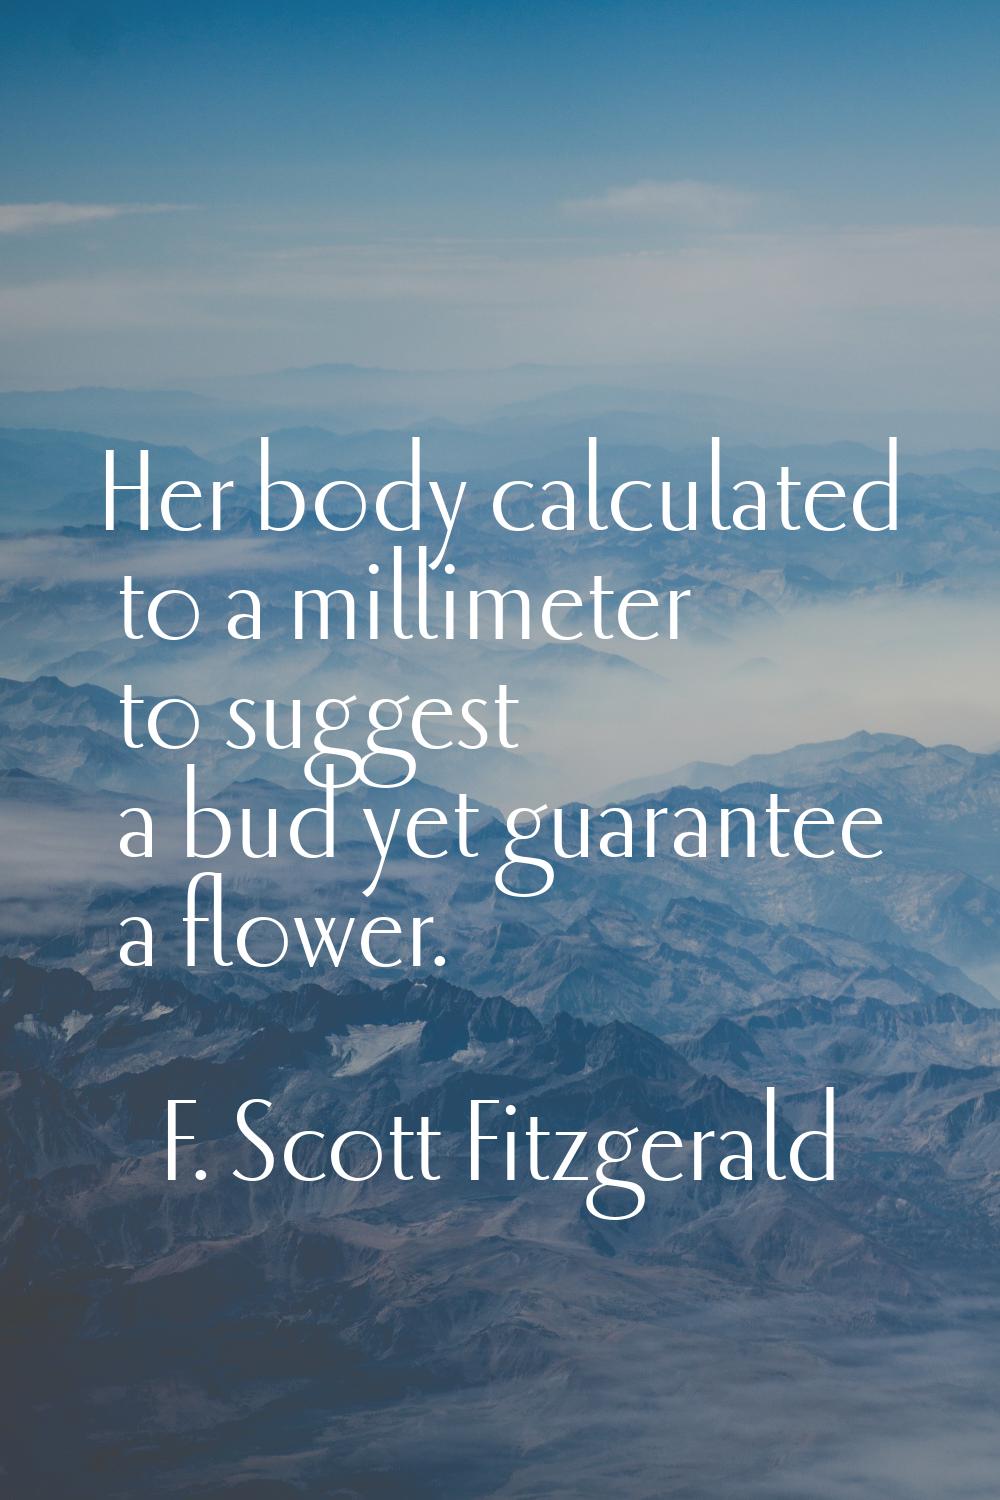 Her body calculated to a millimeter to suggest a bud yet guarantee a flower.